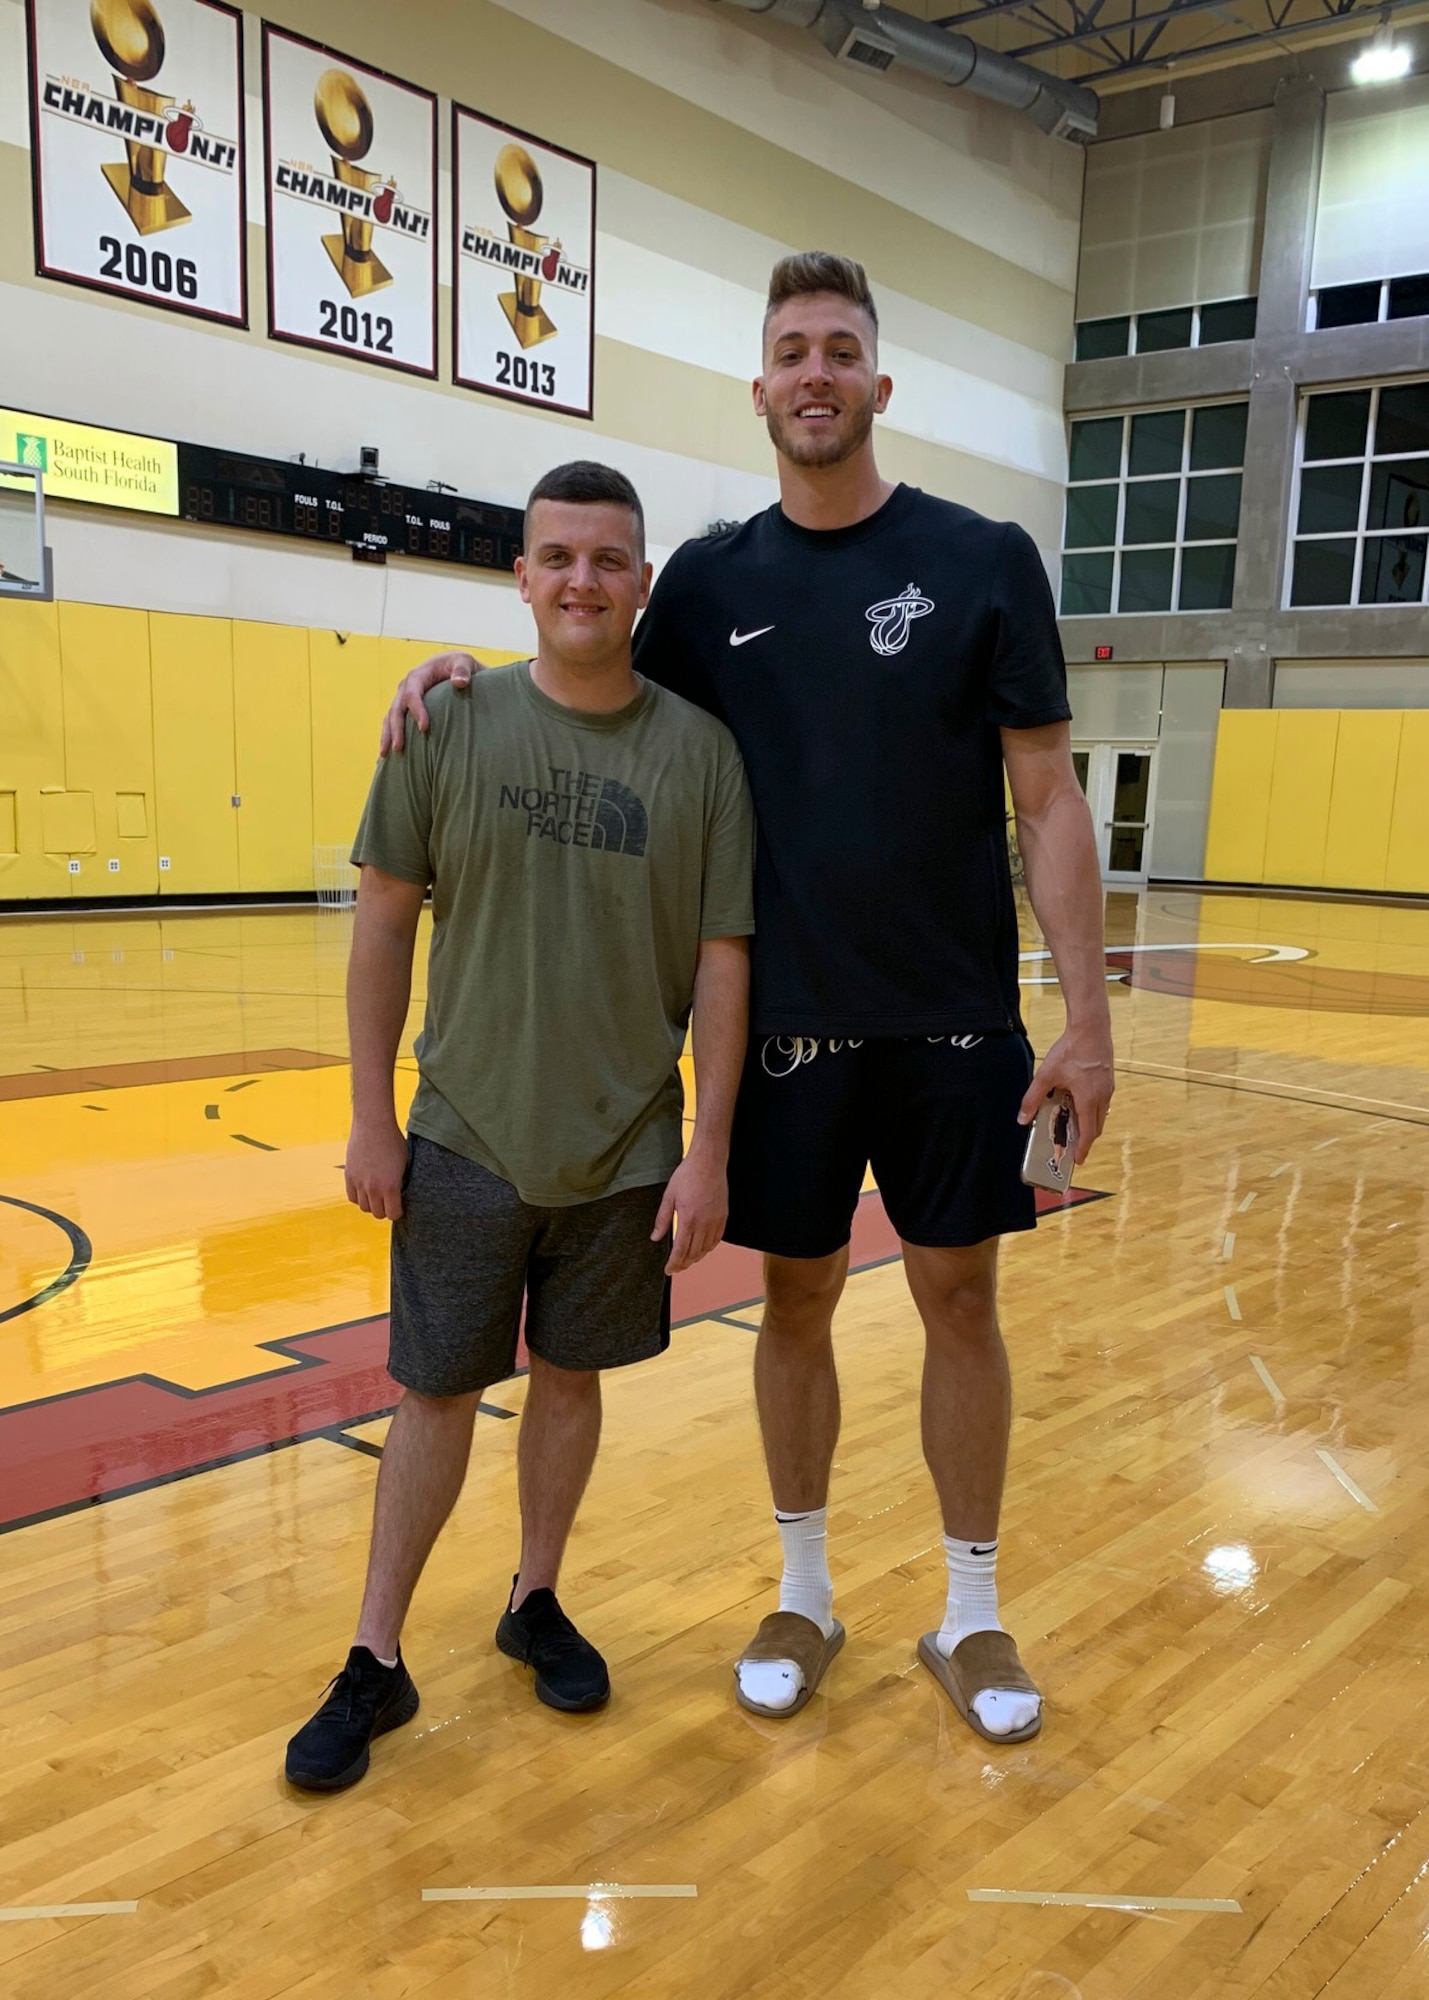 Senior Airman John Senn (left), 103rd Maintenance Squadron aerospace ground equipment maintainer, and Meyers Leonard, Miami Heat power forward, at the Miami Heat practice facility in Miami, Fla. After the two met through online gaming, Leonard helped Senn achieve his fitness goals by designing a workout and nutrition plan and checking in for weekly weigh-ins. (Courtesy photo)